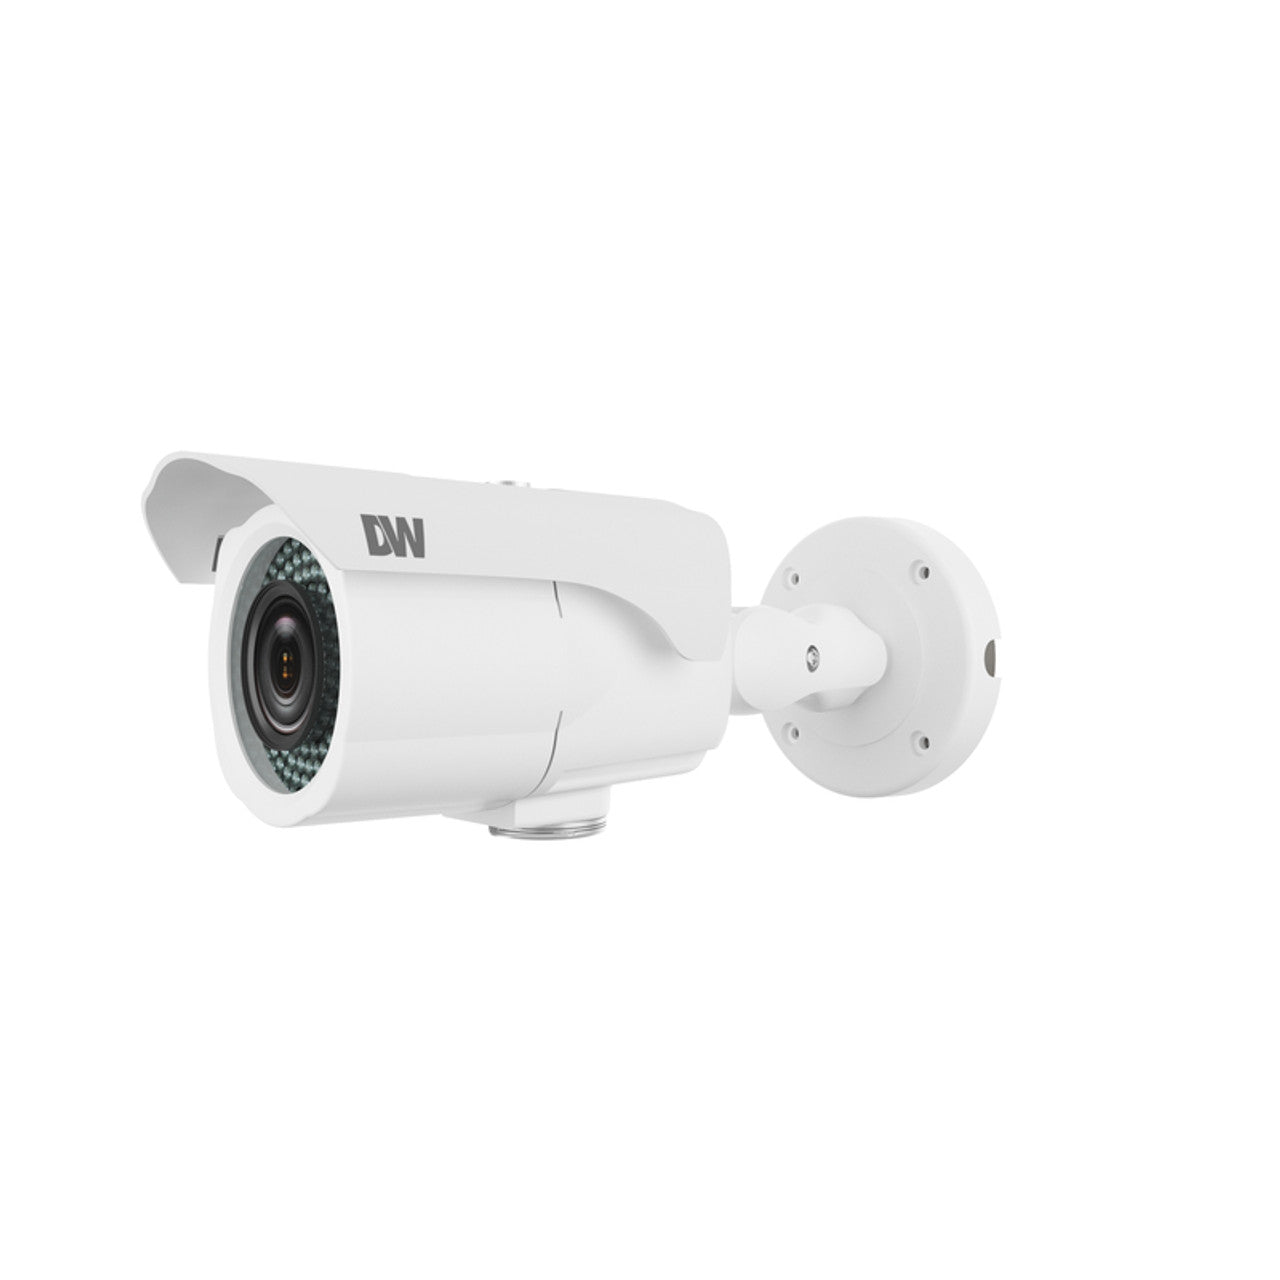 Digital Watchdog DWC-MB44WiAWC5 4MP Night Vision Outdoor Bullet IP Security Camera with 512GB Storage, CaaS